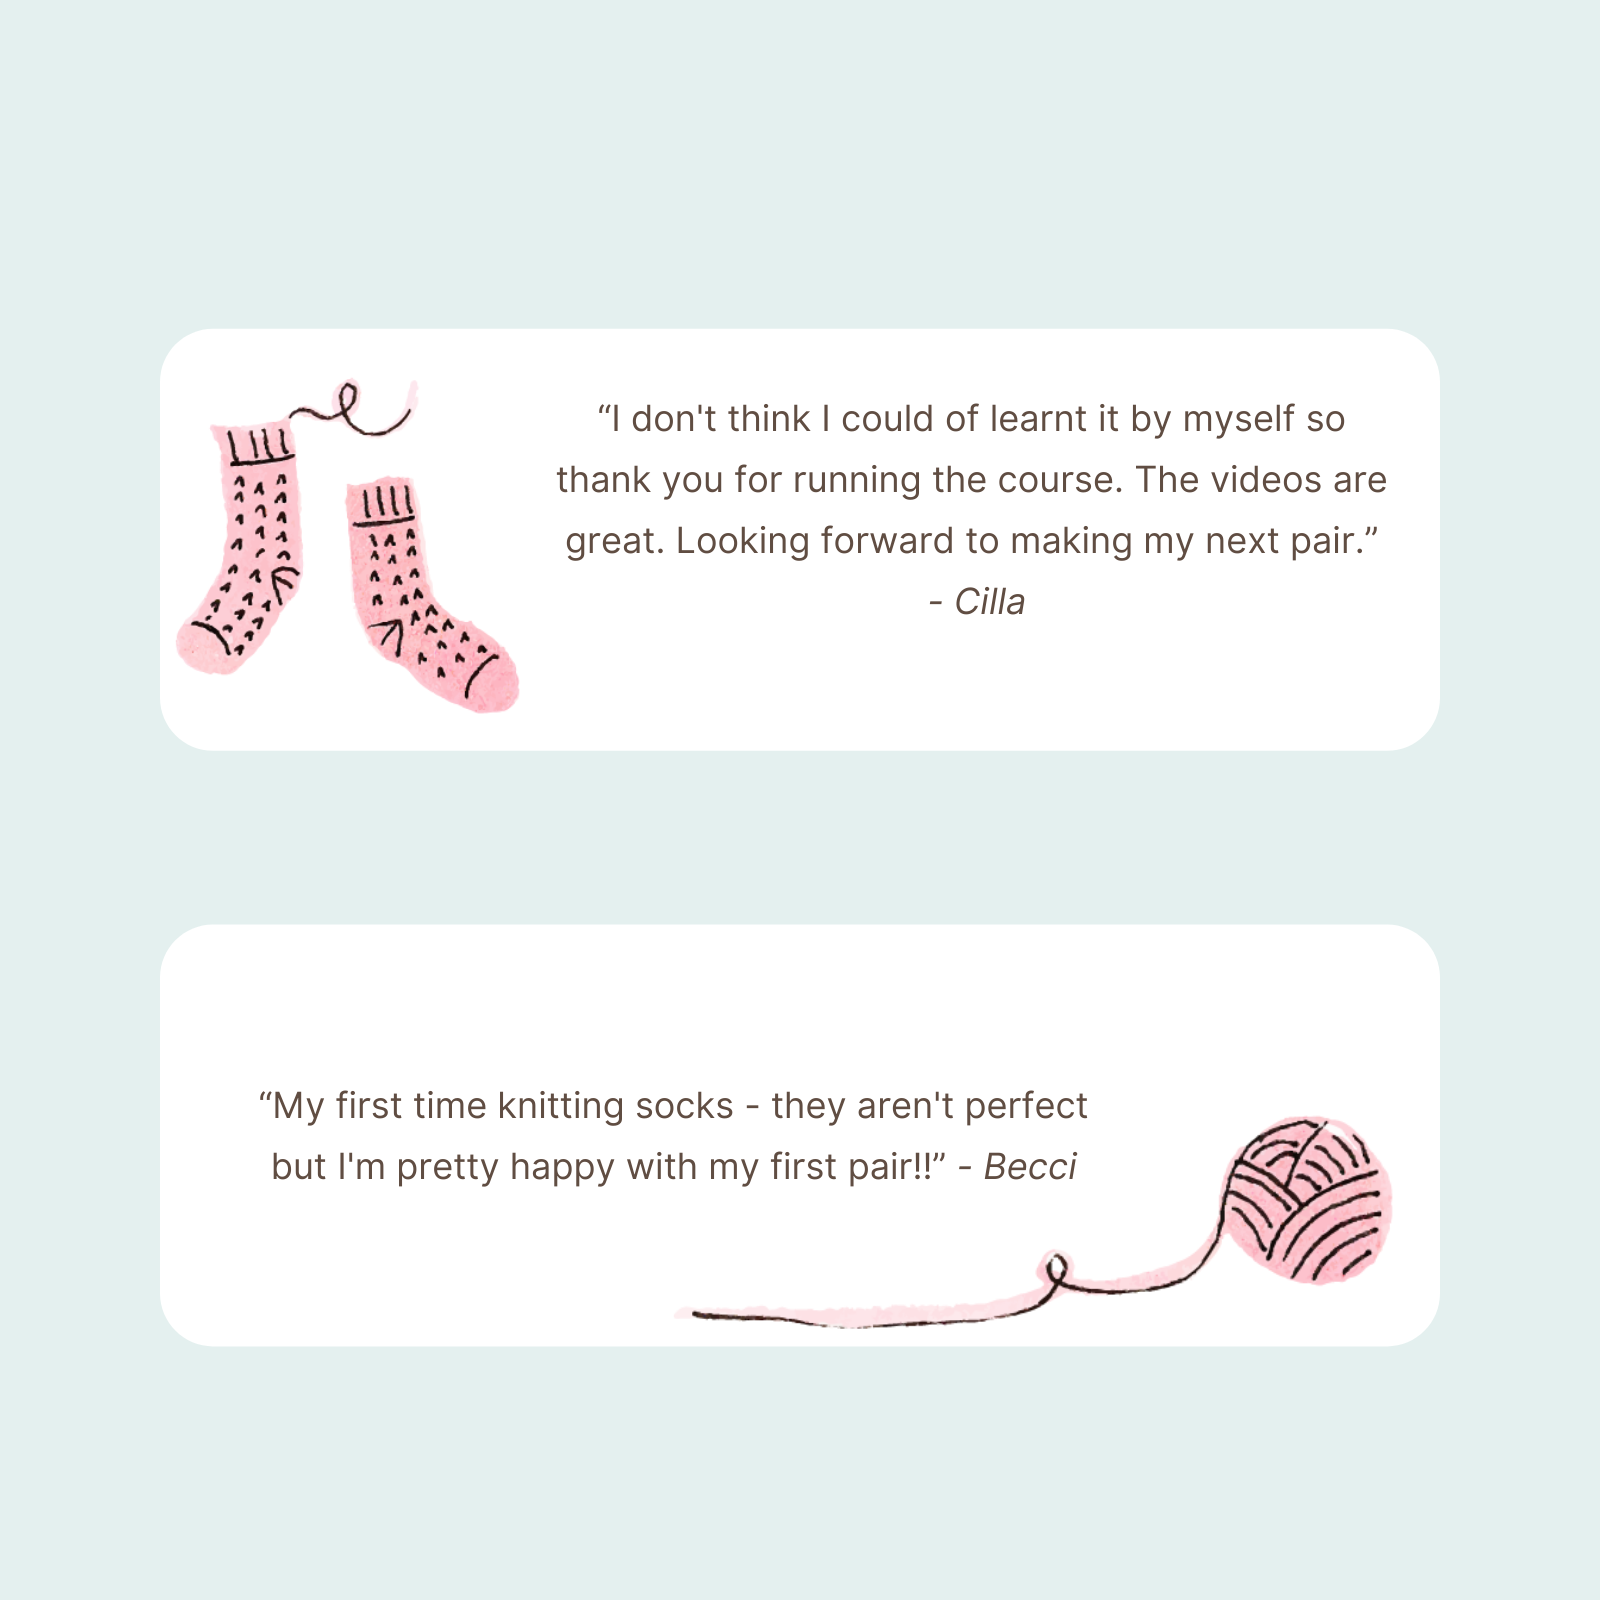 “Knitting socks, after three disappointing projects, was something I thought would never interest me again, but participating in your Sock Knitting Club has changed my attitude. Thanks again for putting fun back in s (1).png